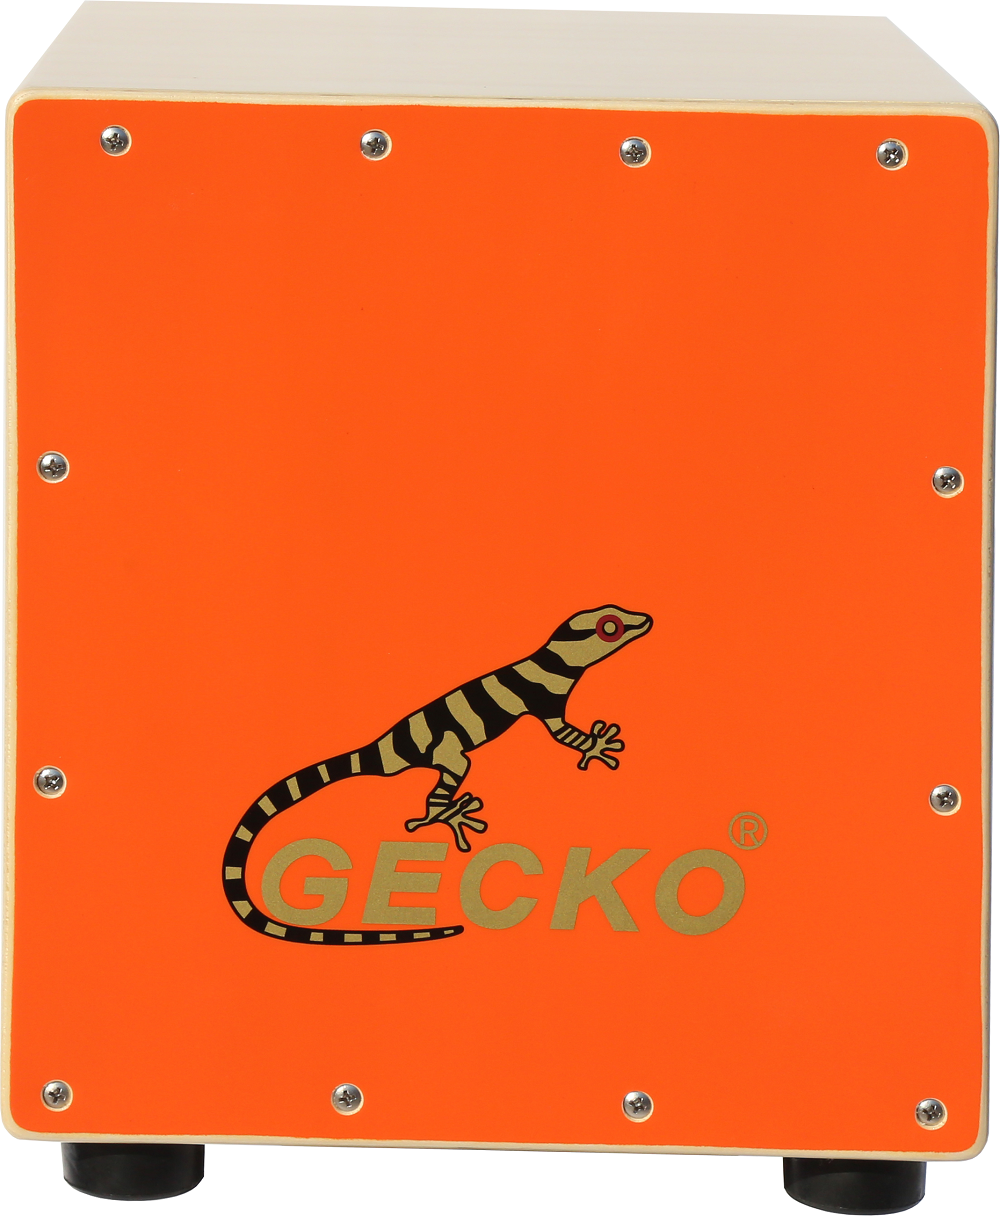 IOS Certificate Cutaway Ukulele -
 Hot selling Cajon Drum Musical Instruments from GECKO Factory Supplier – GECKO